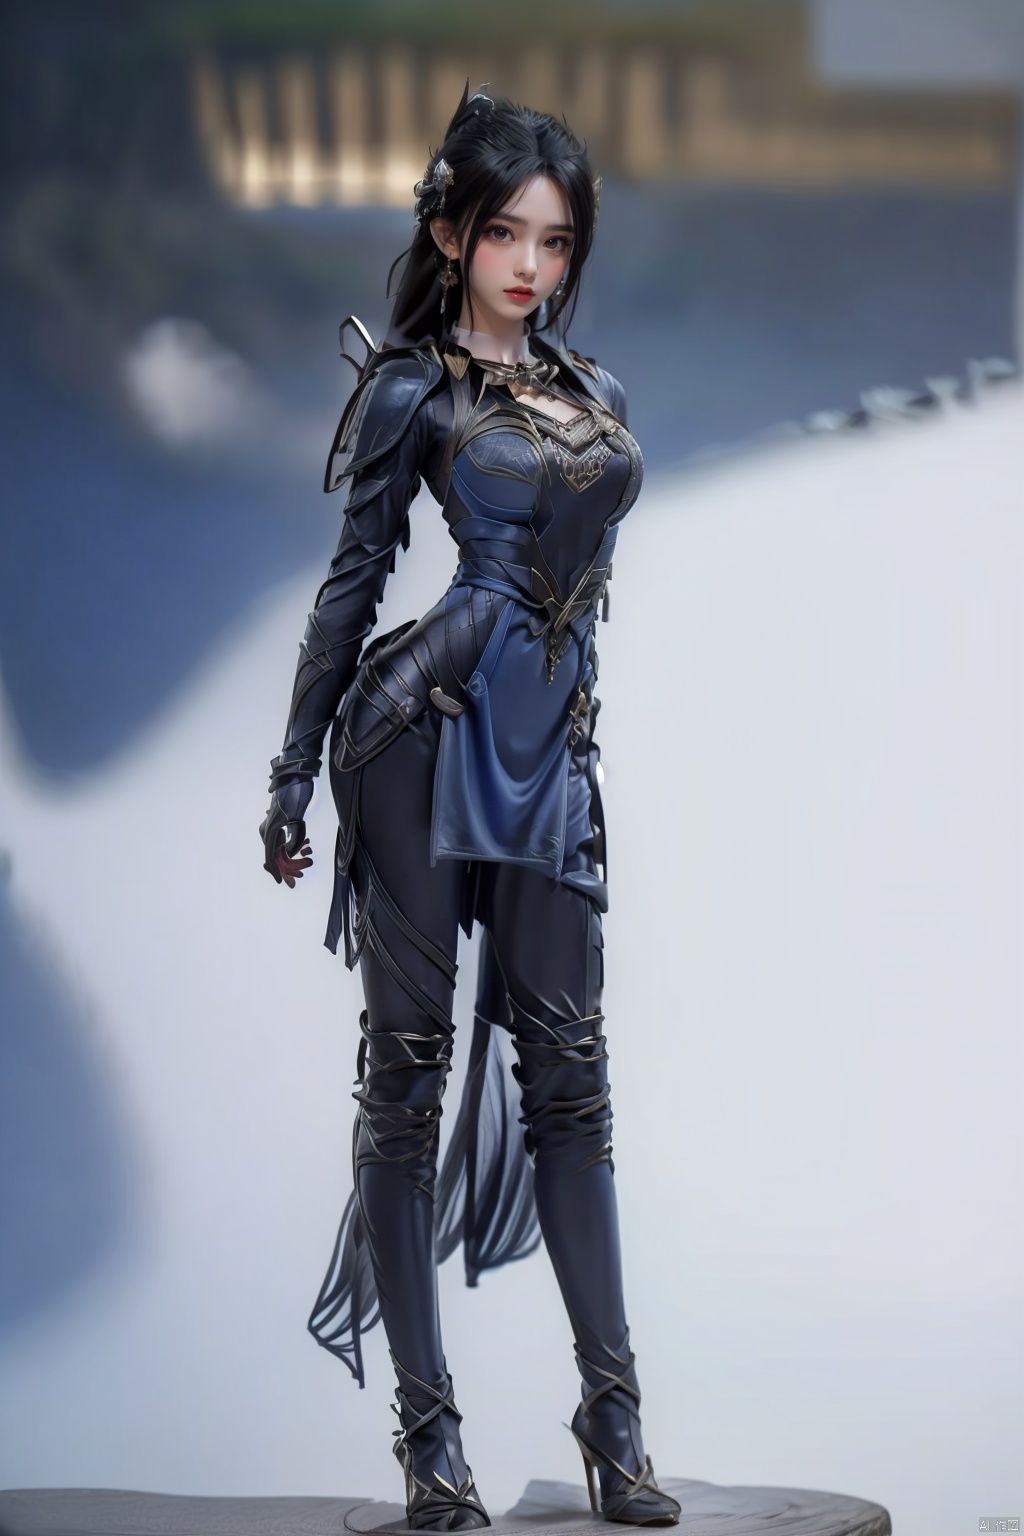  (Full body standing: 1.2) Blue dress, a small amount of armor, female assassin, dark red short hair, facing the screen, standing posture, facial details, skin details, 3D model, one girl, 8K, wallpaper, Bronze_Armor,luxueqi,呃呃呃